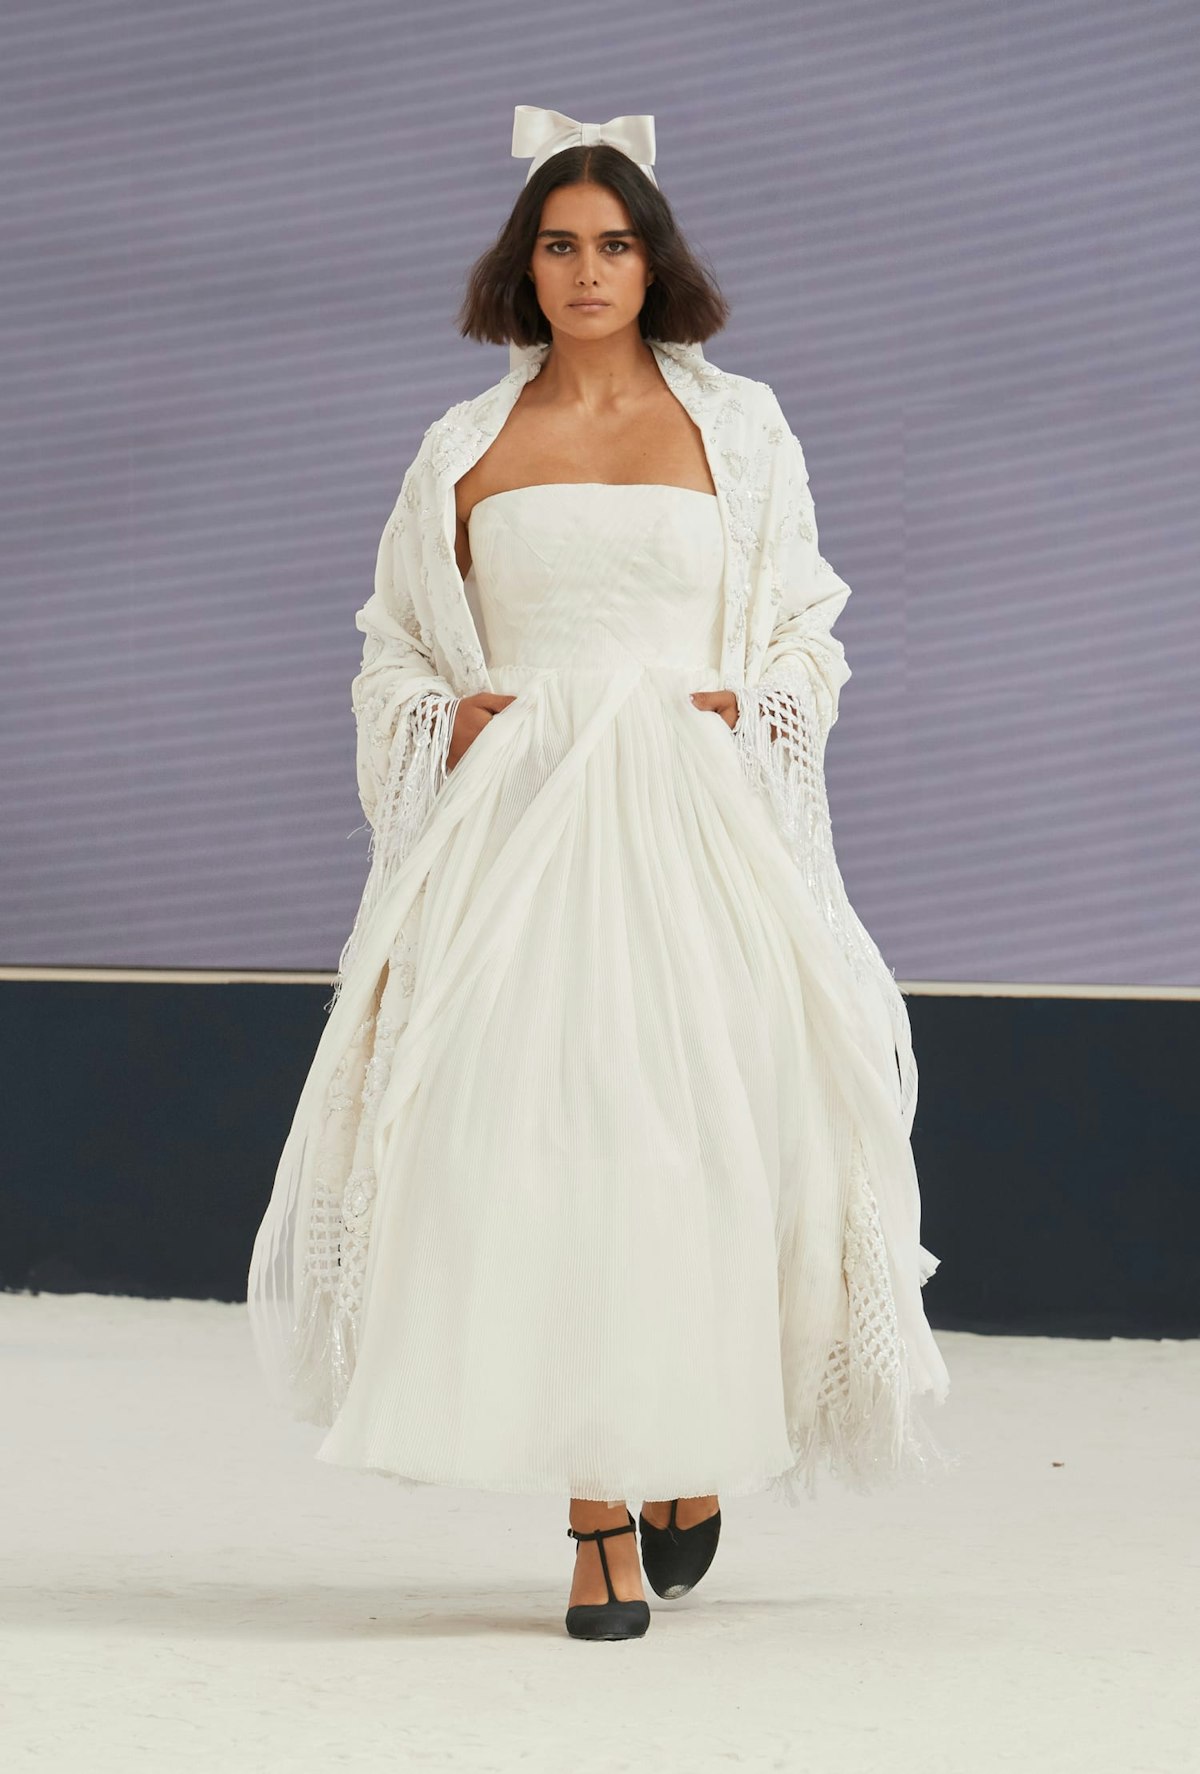 Chanel wedding: The most beautiful Chanel couture wedding dresses of all  time